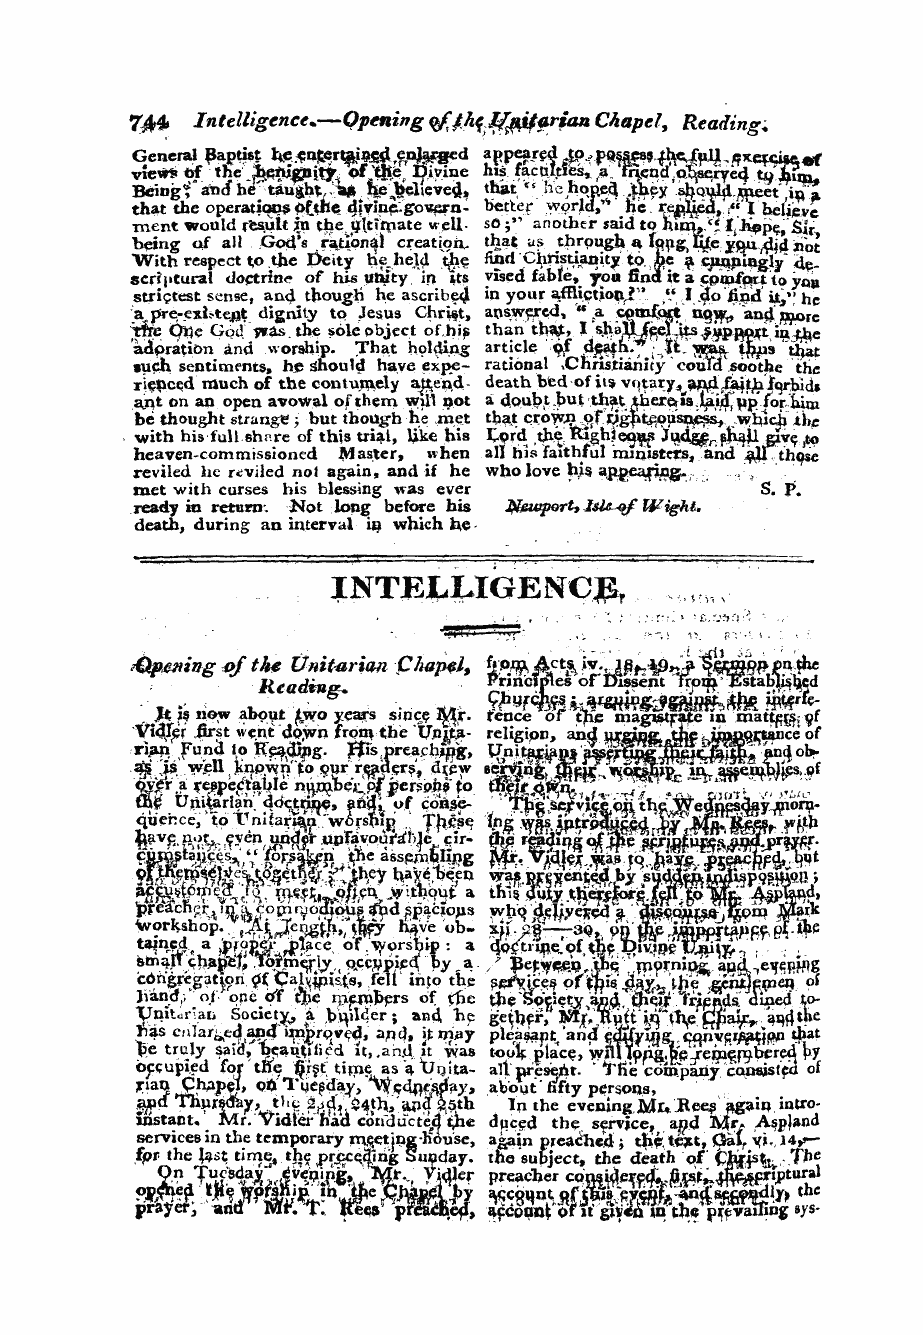 Monthly Repository (1806-1838) and Unitarian Chronicle (1832-1833): F Y, 1st edition: 52